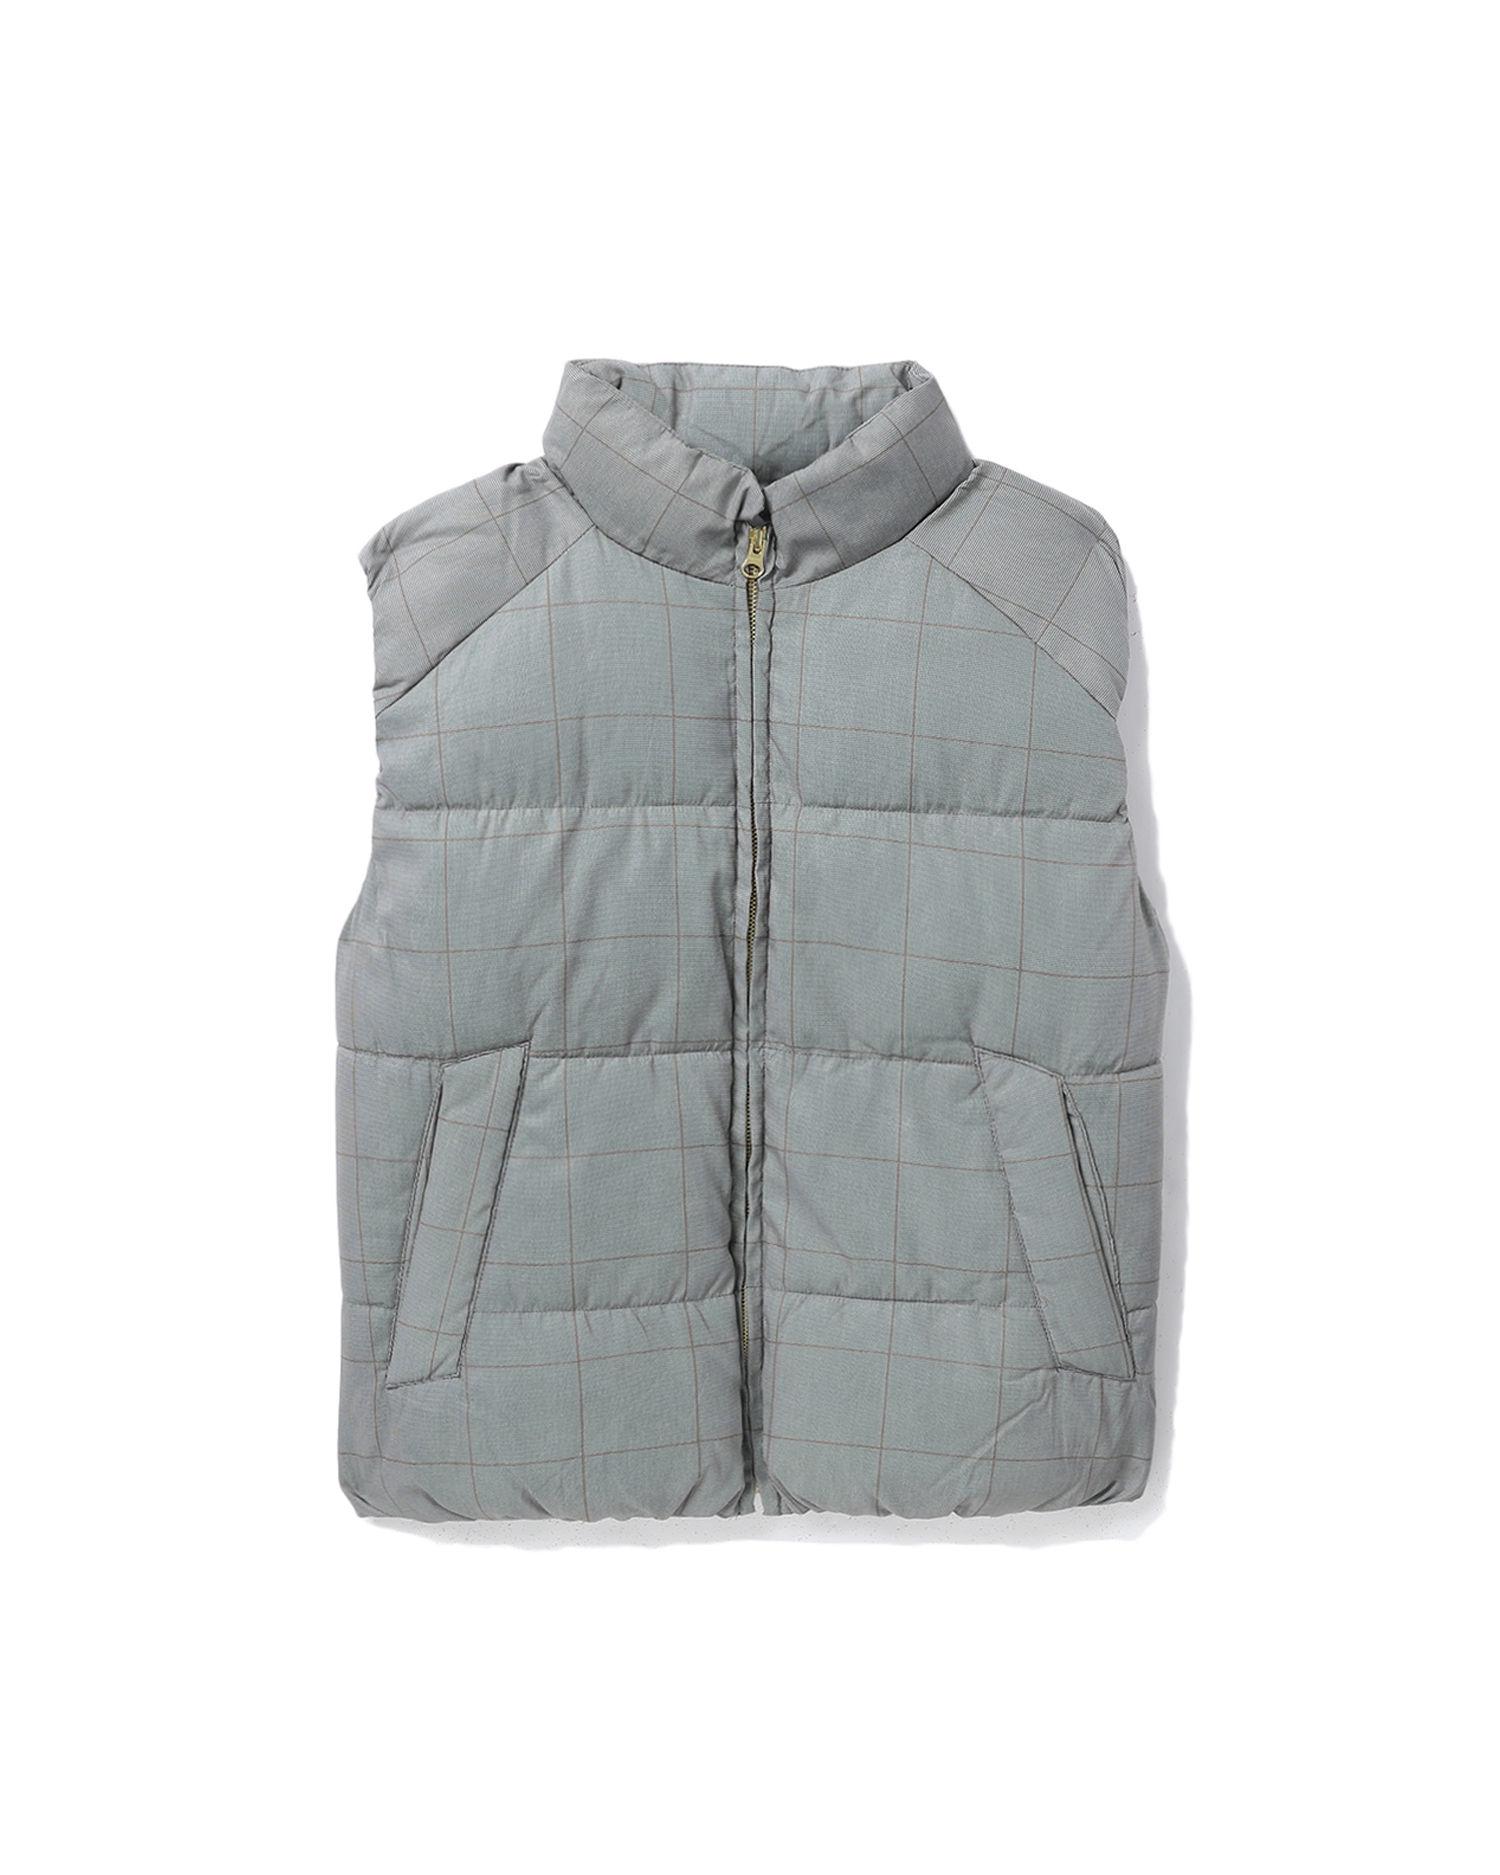 Padded vest jacket by AMERICAN HOLIC